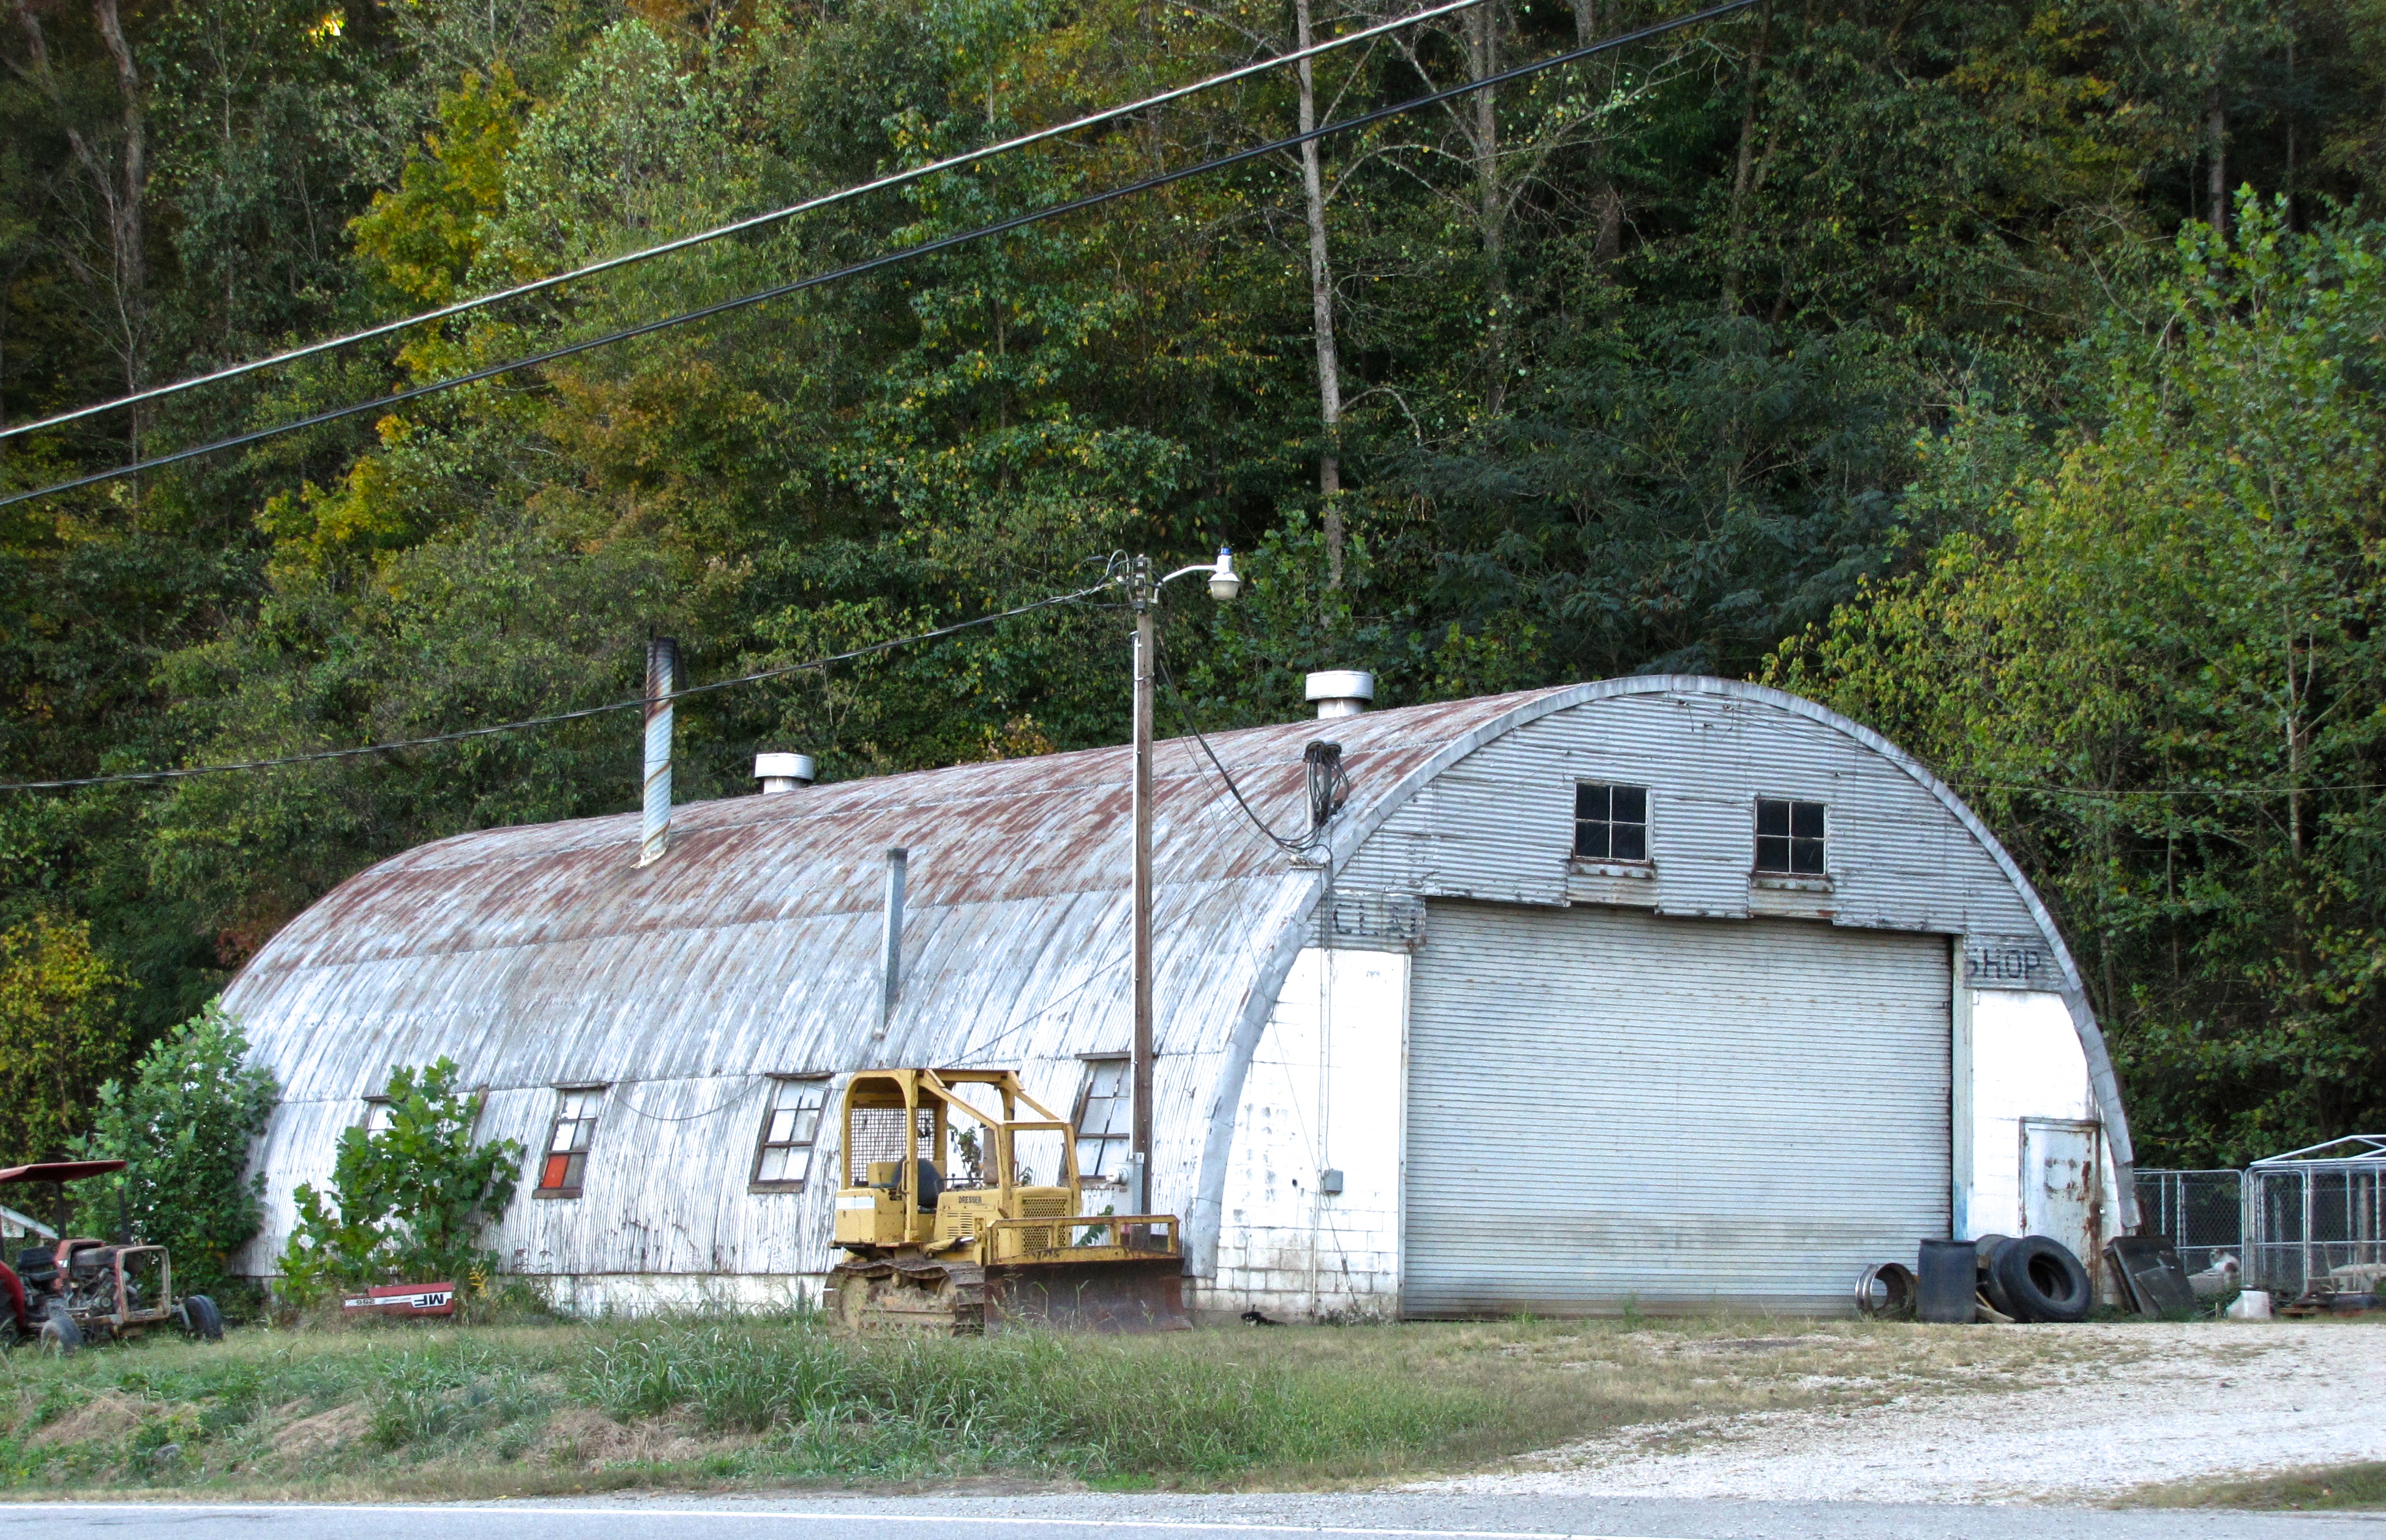 quonset hut in Anamosa, IA